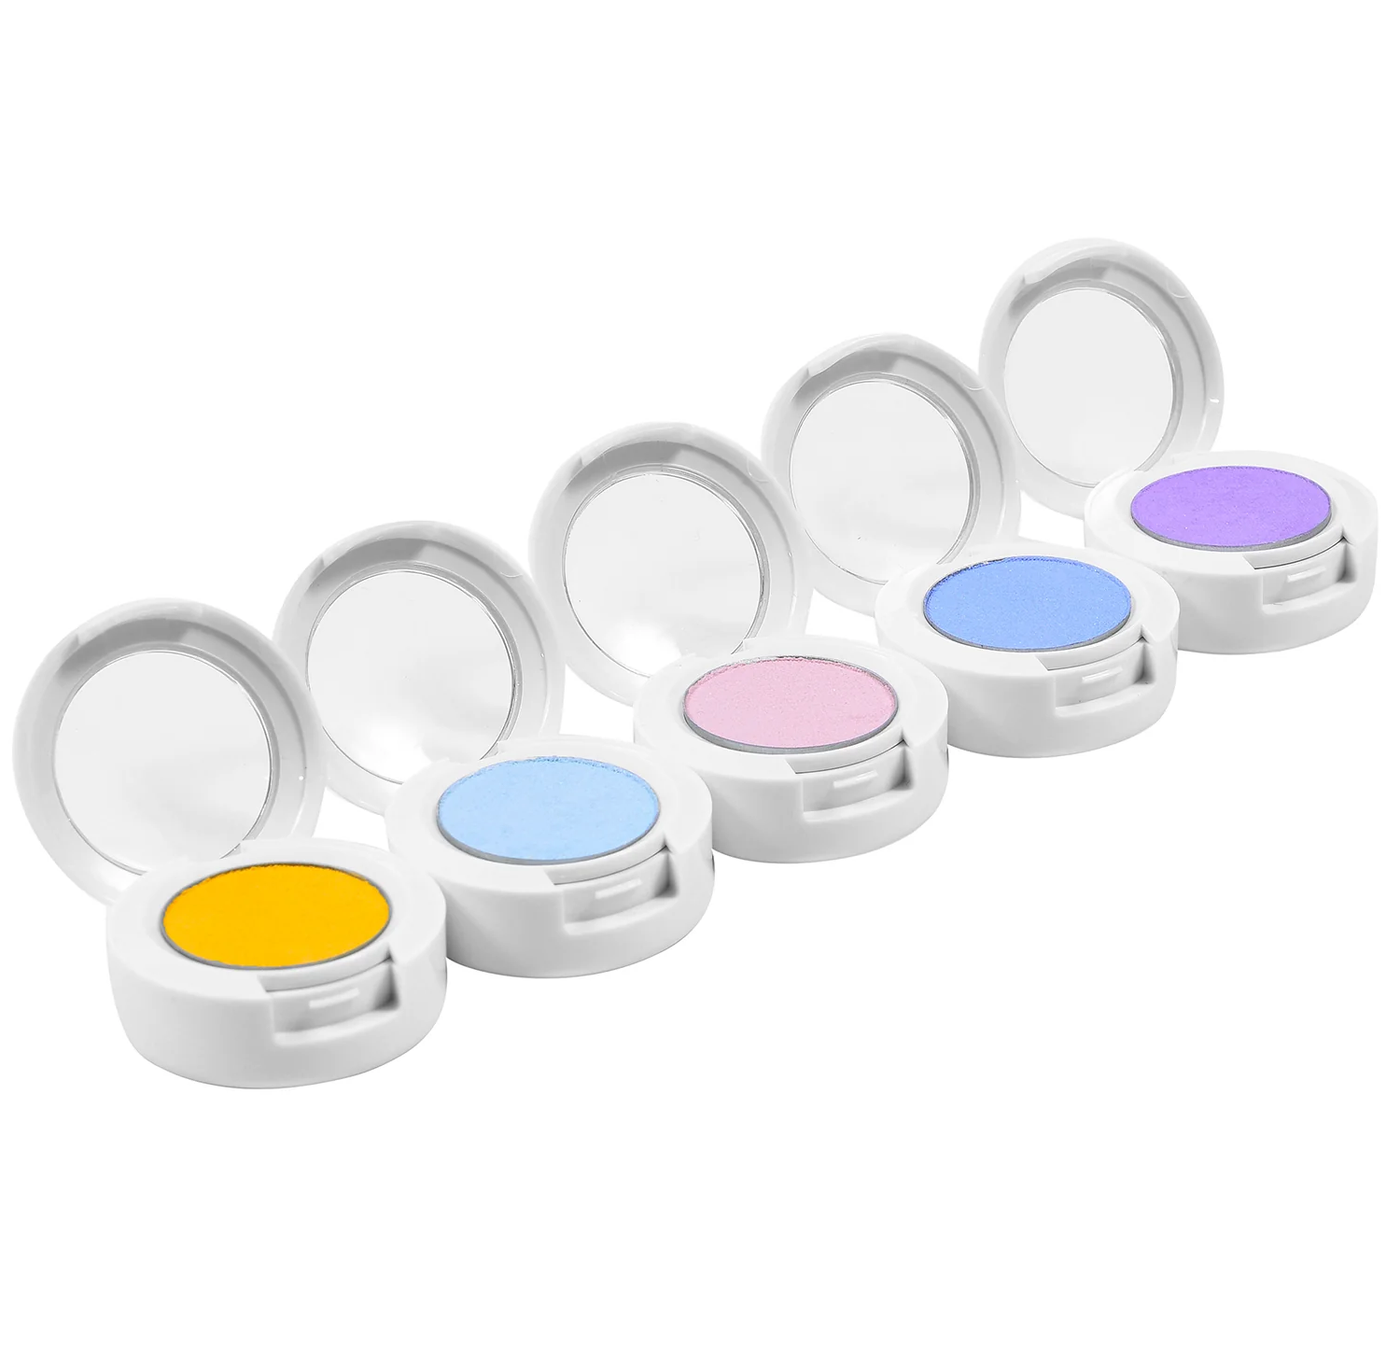 Klee Girls Eyeshadow Compact - 5 colors to choose from